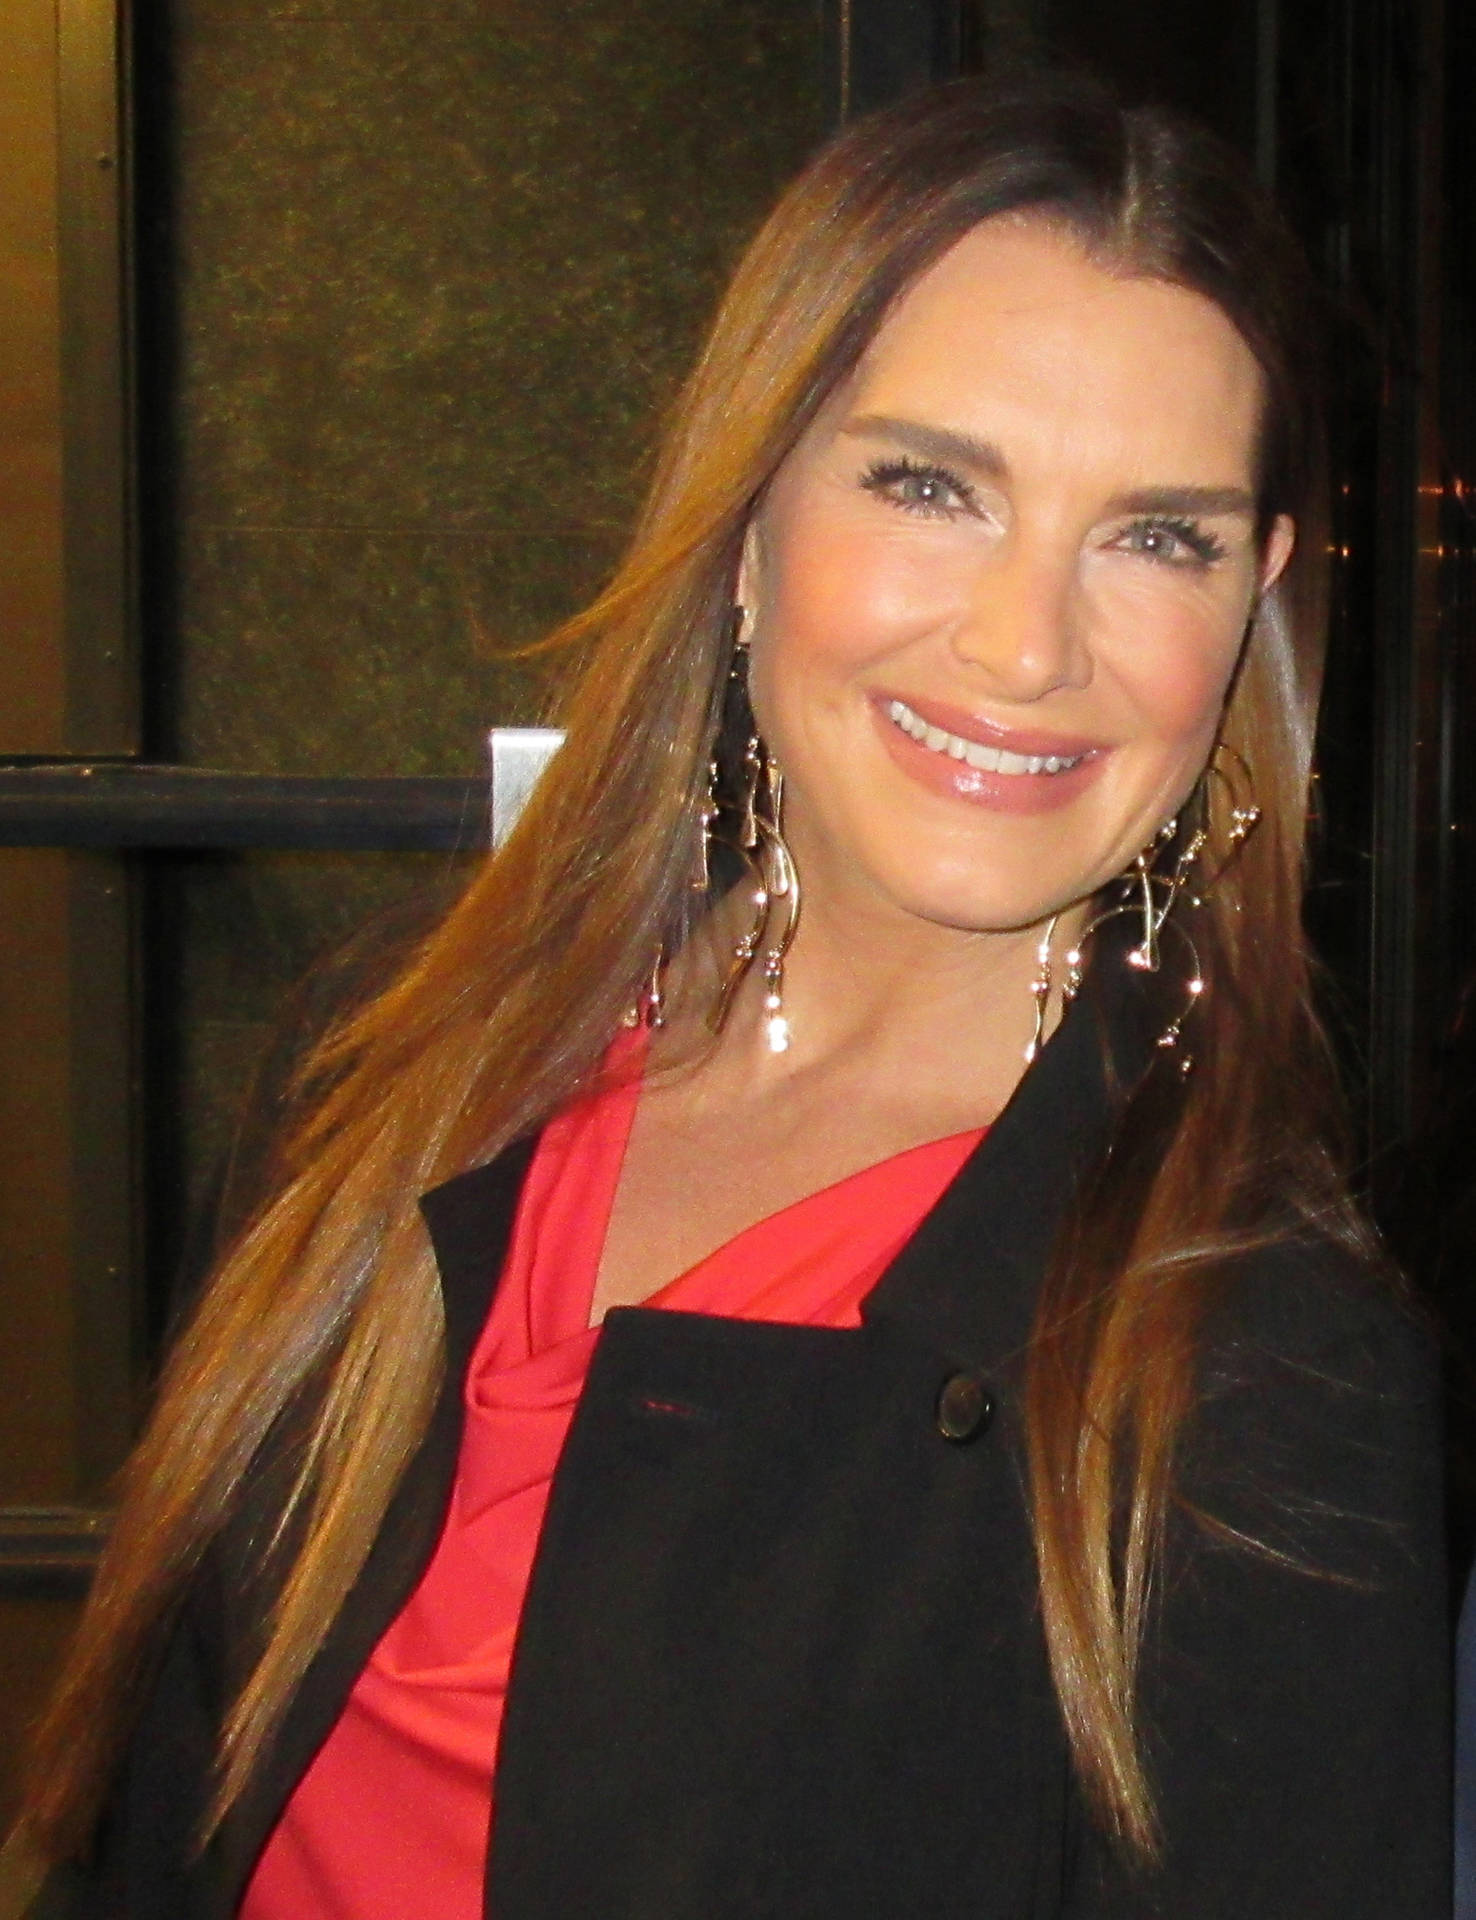 The Ever-radiant Brooke Shields With Her Charming Smile.